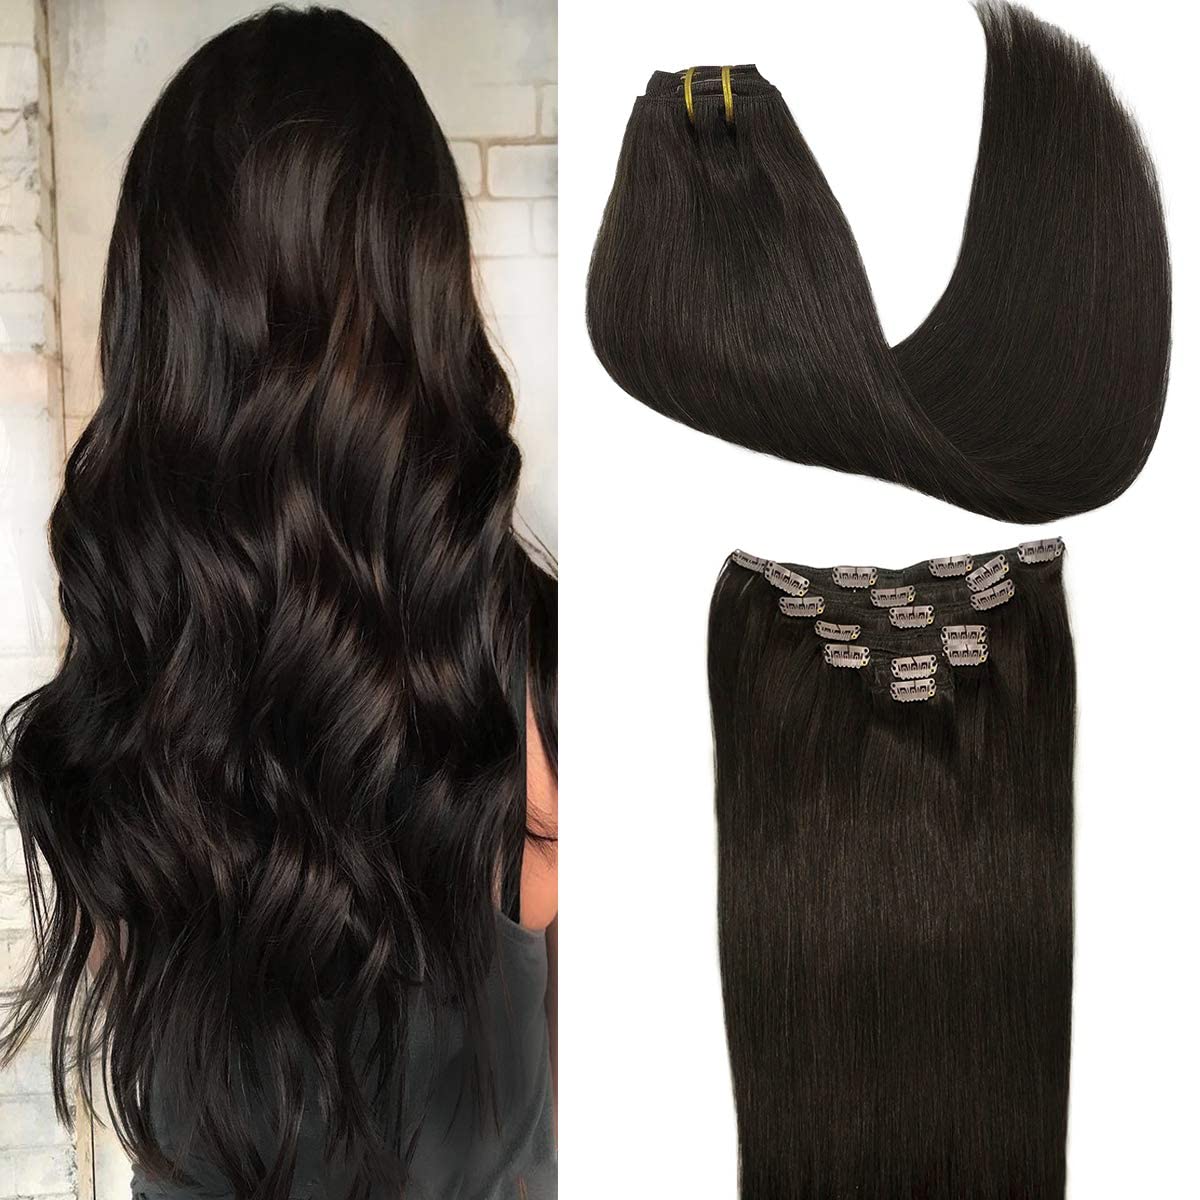 wholesale-hair-extensions-in-australia-the-market-is-famous-for-high-quality-hair-extensions-1